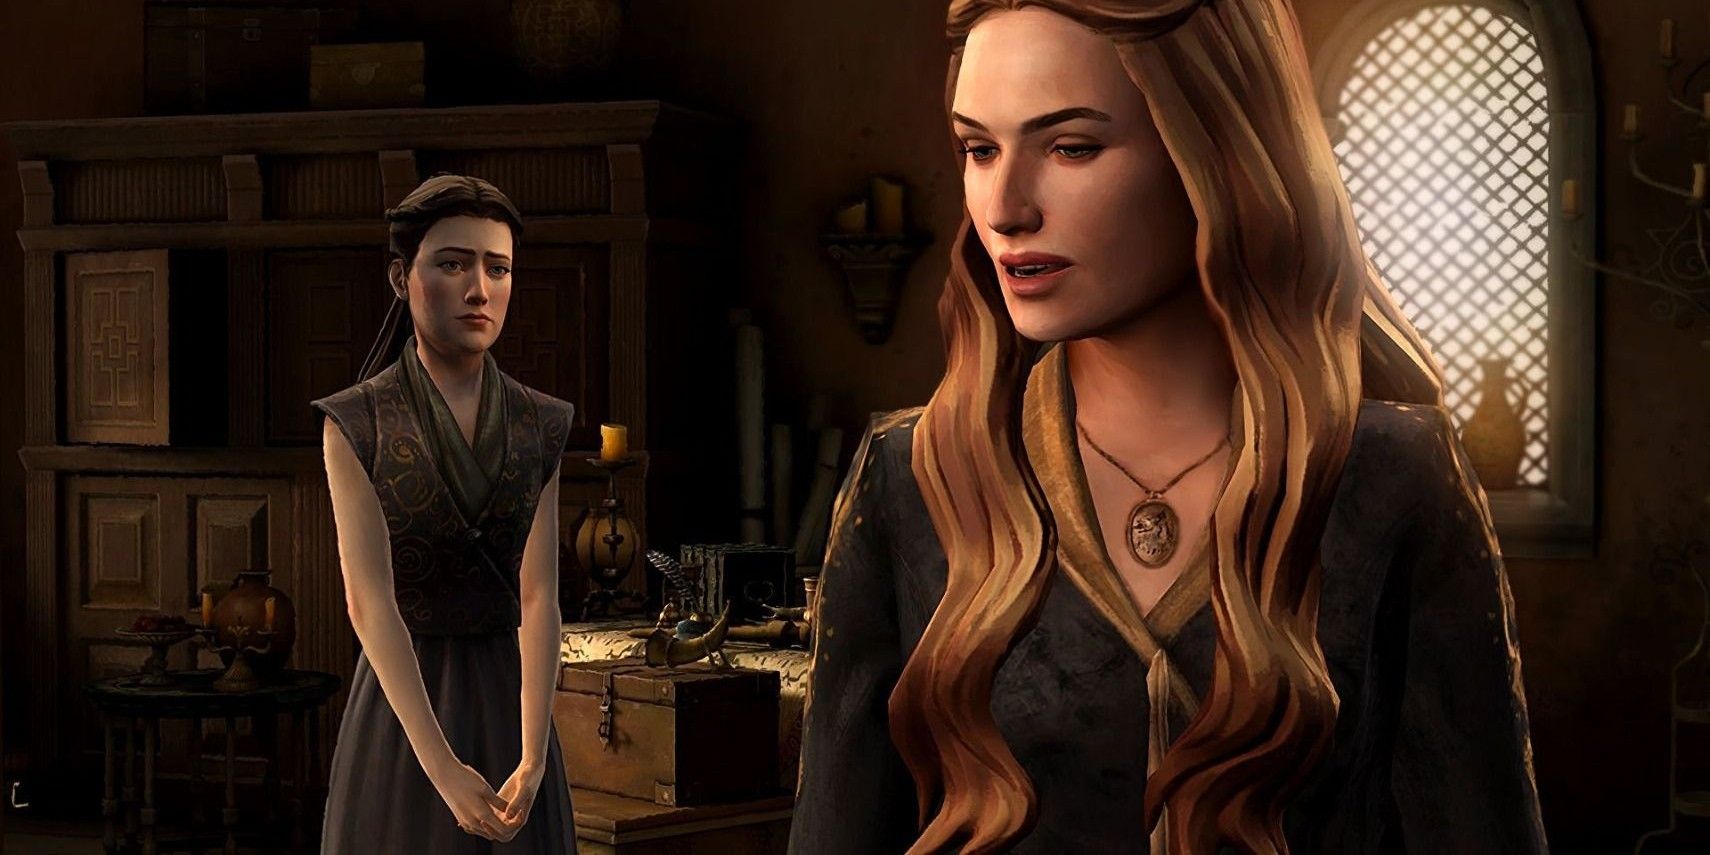 Telltales Game Of Thrones Screenshot Of Mira Forrester And Cersei Lannister